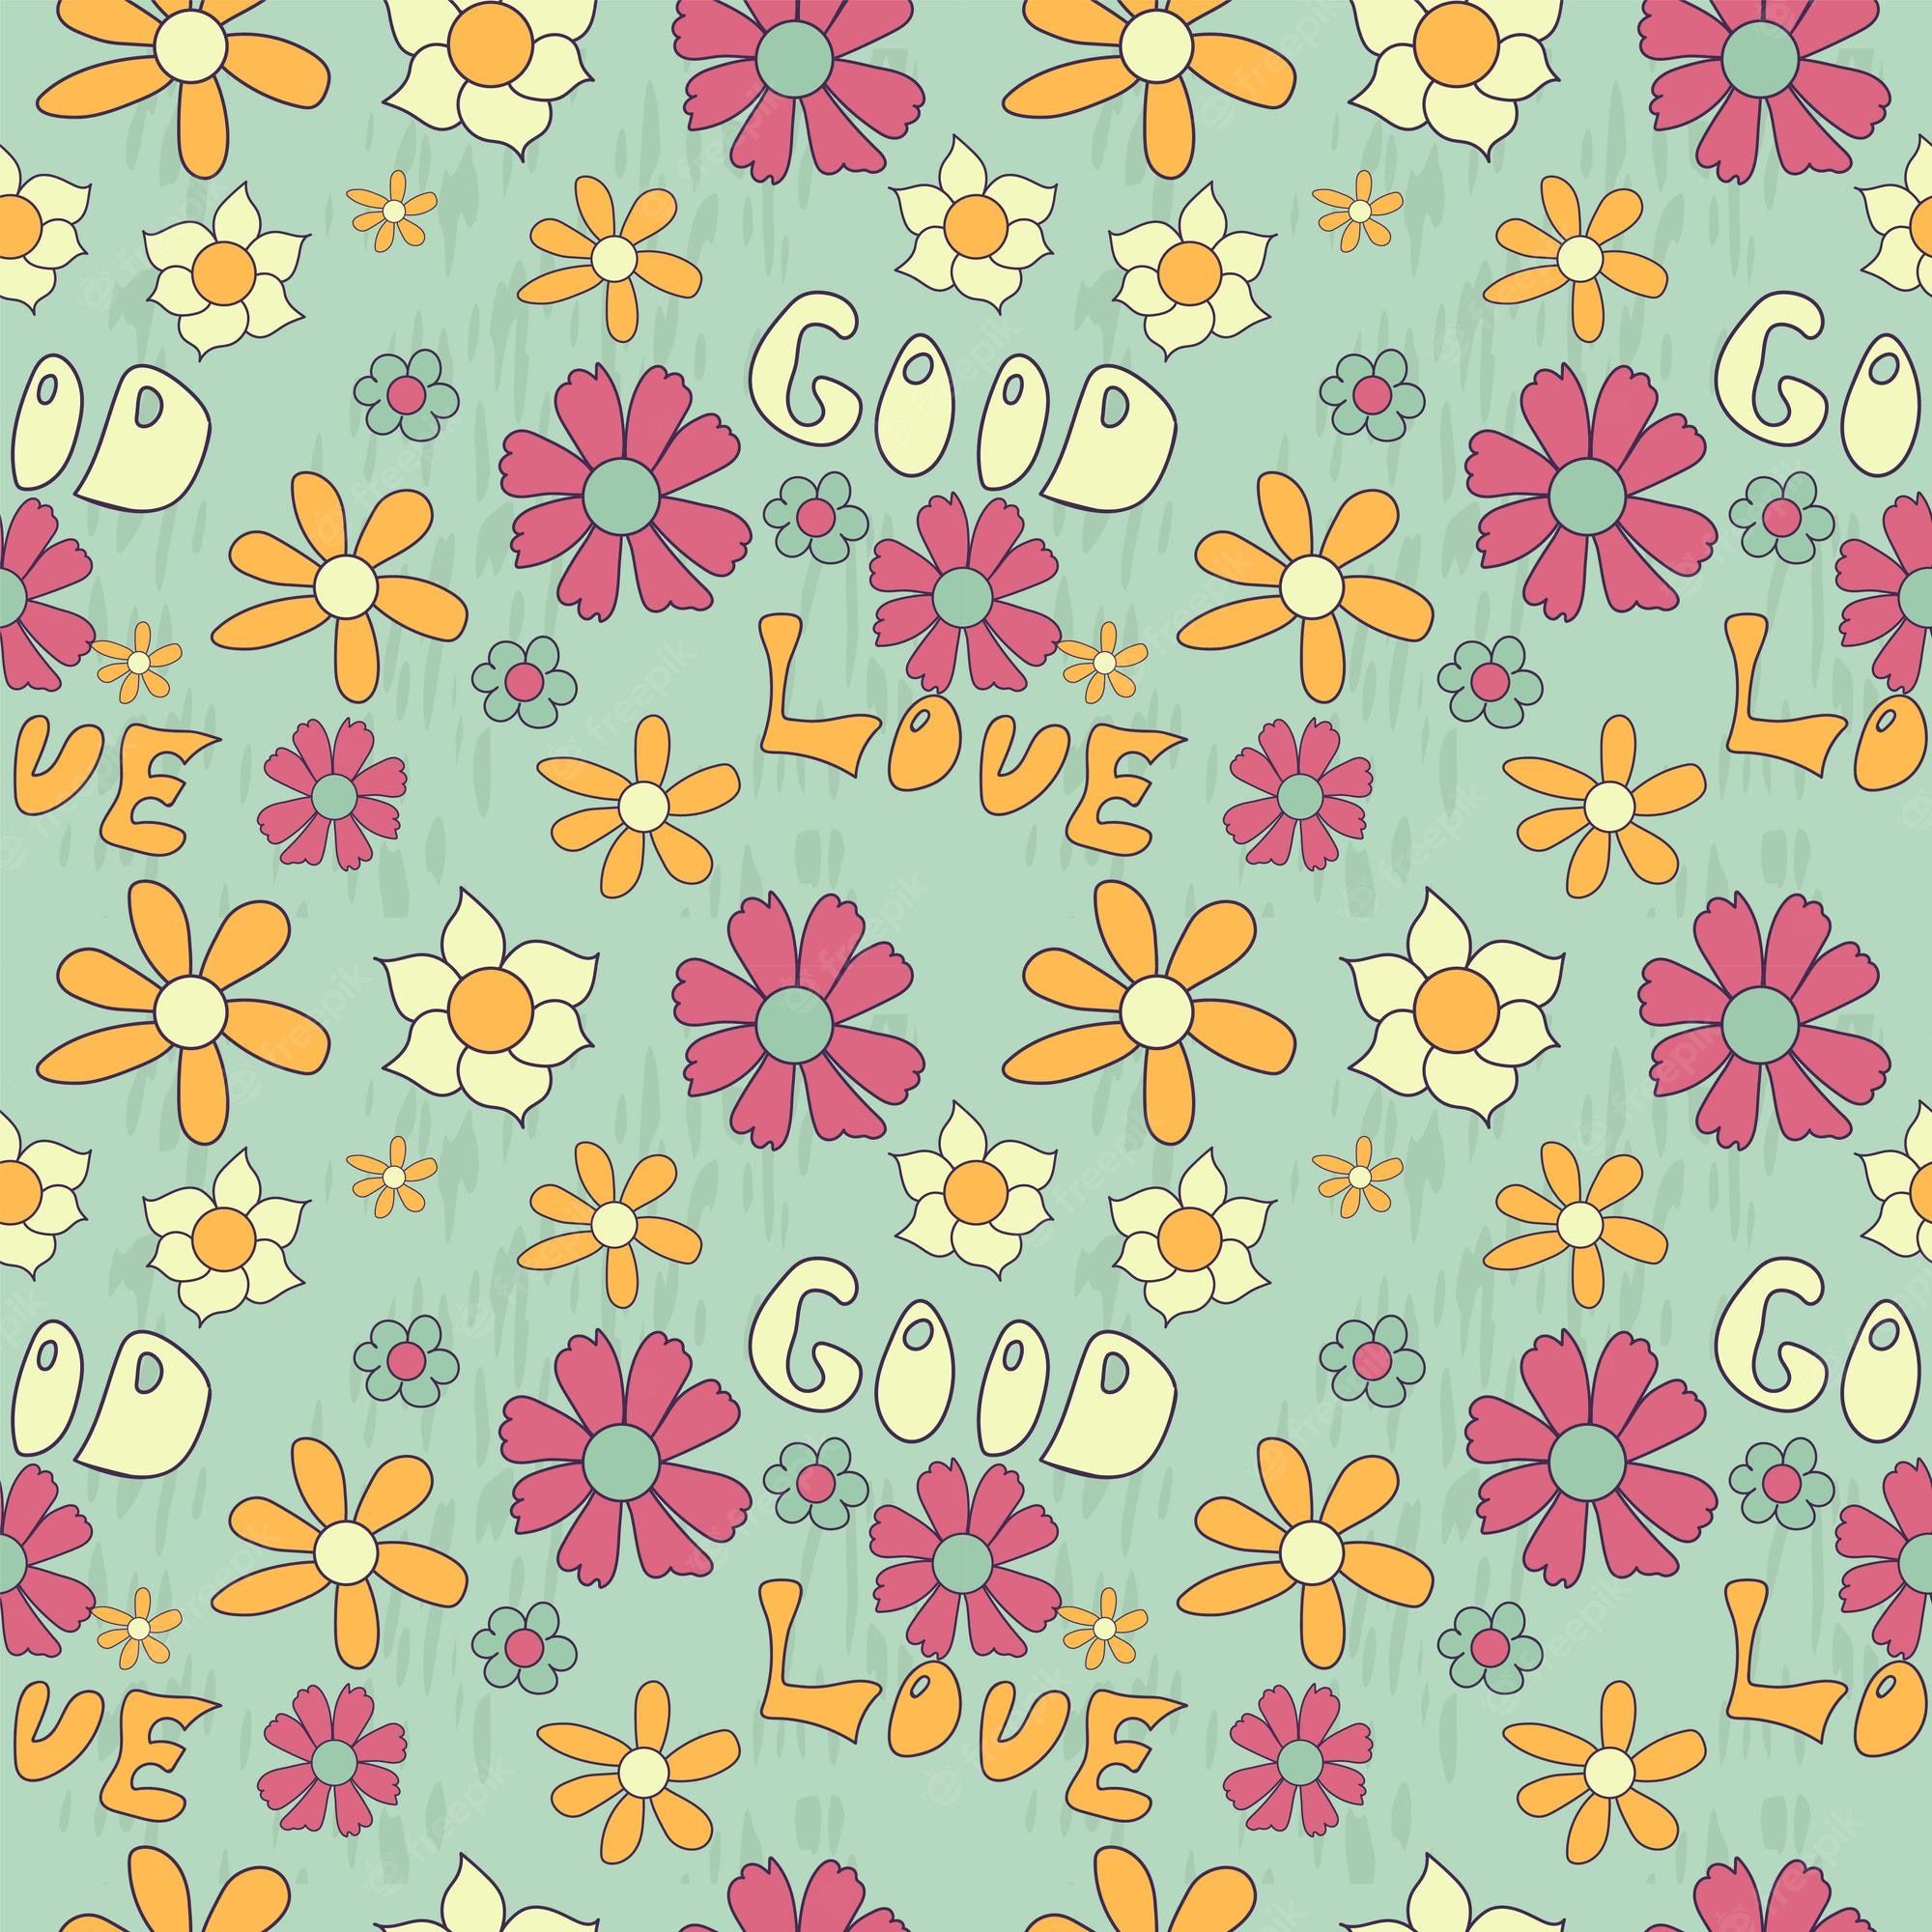 Premium Vector's retro seamless pattern. 60s and 70s aesthetic style